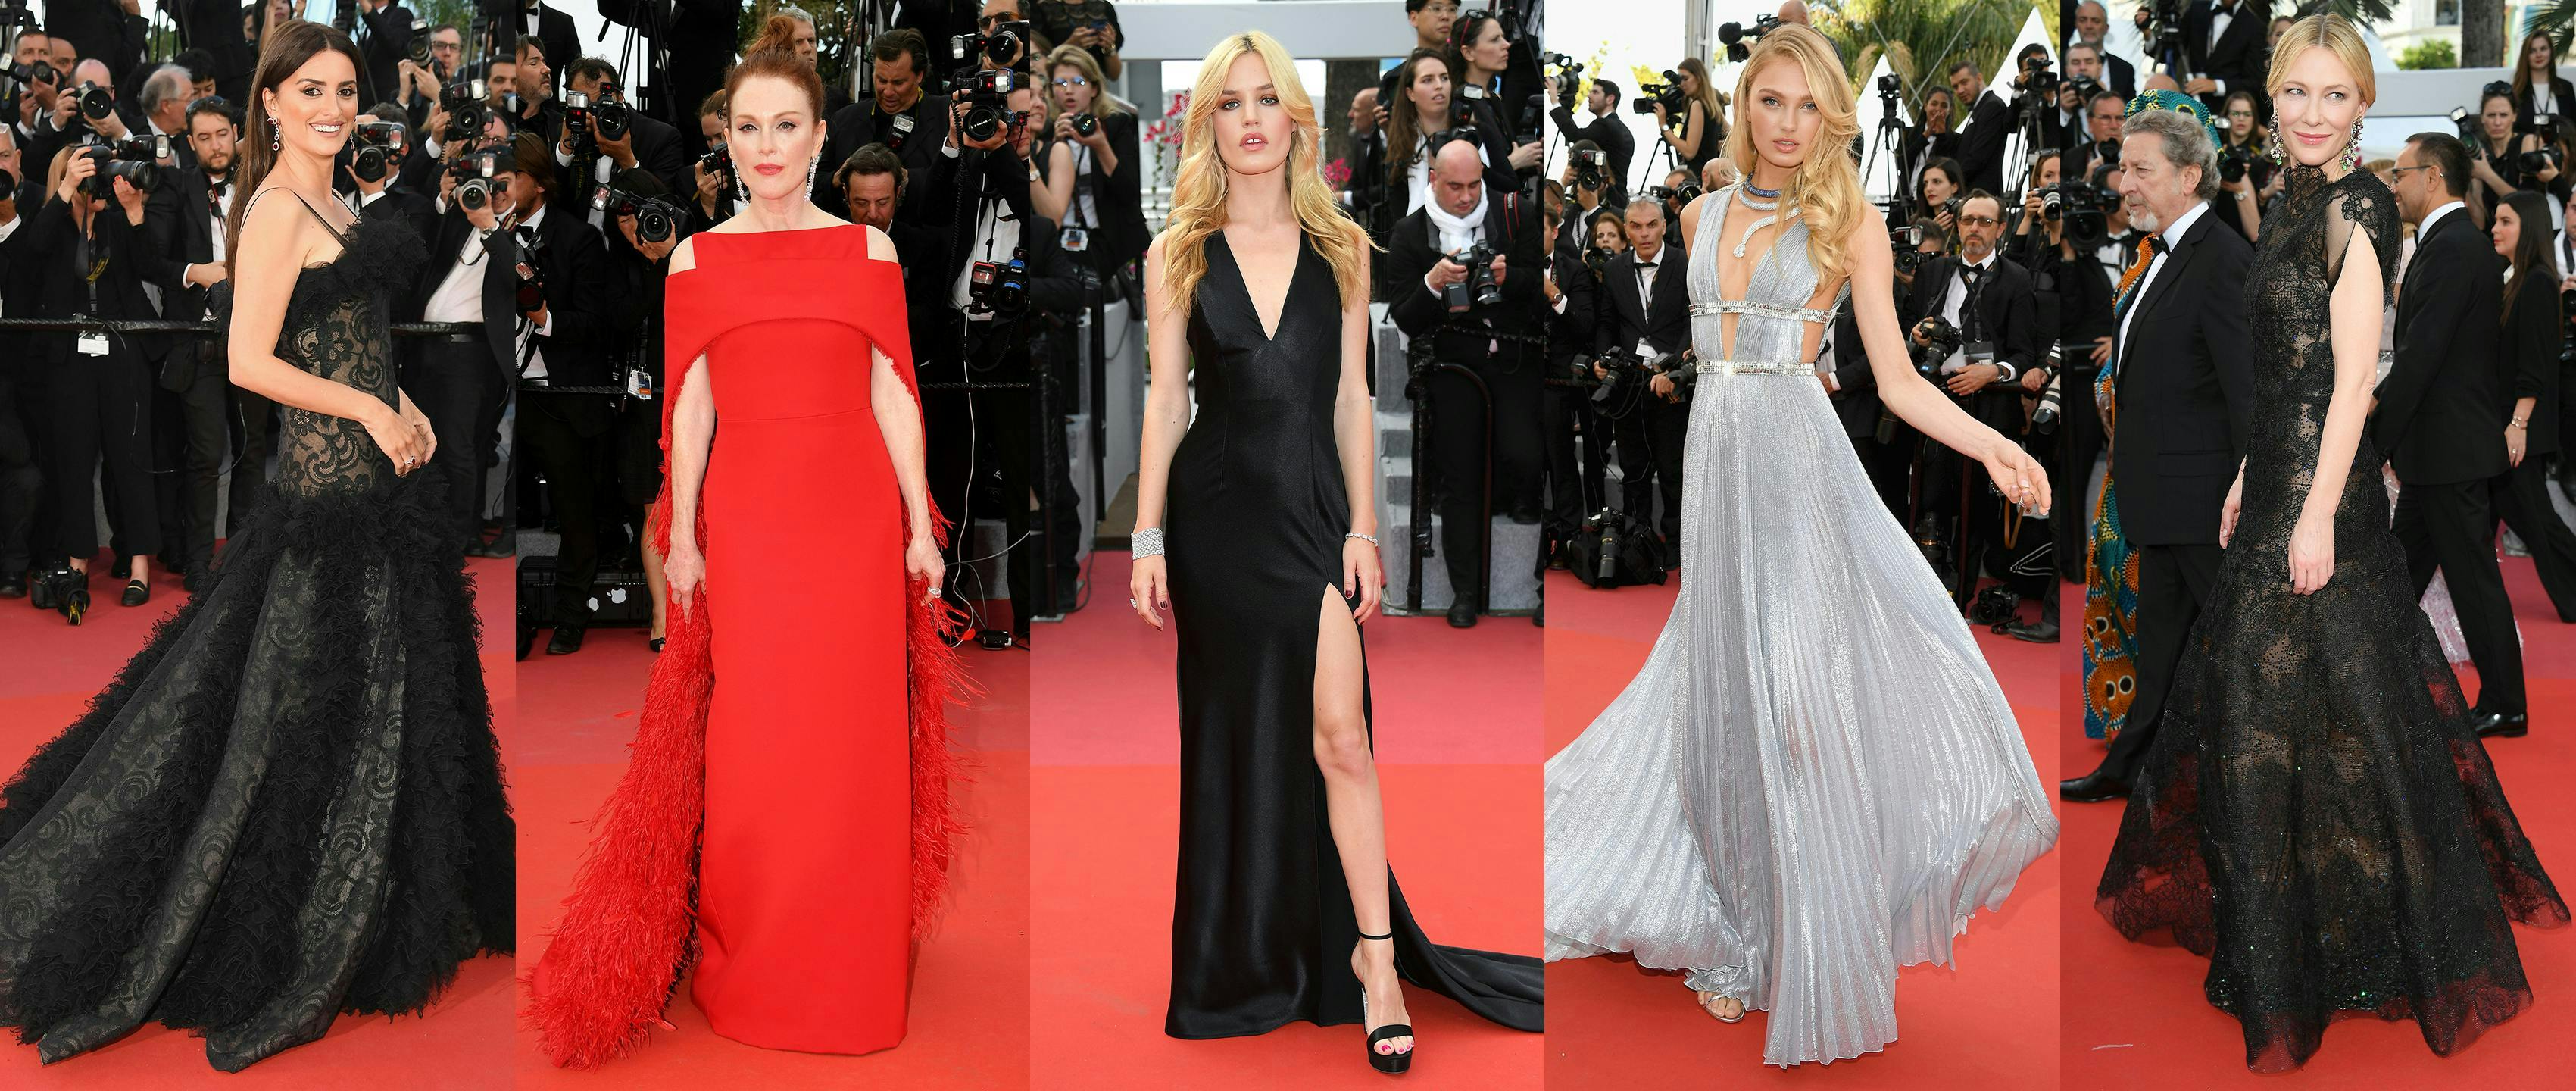 arts culture and entertainment film industry celebrities cannes feedrouted_europe person human red carpet red carpet premiere premiere fashion